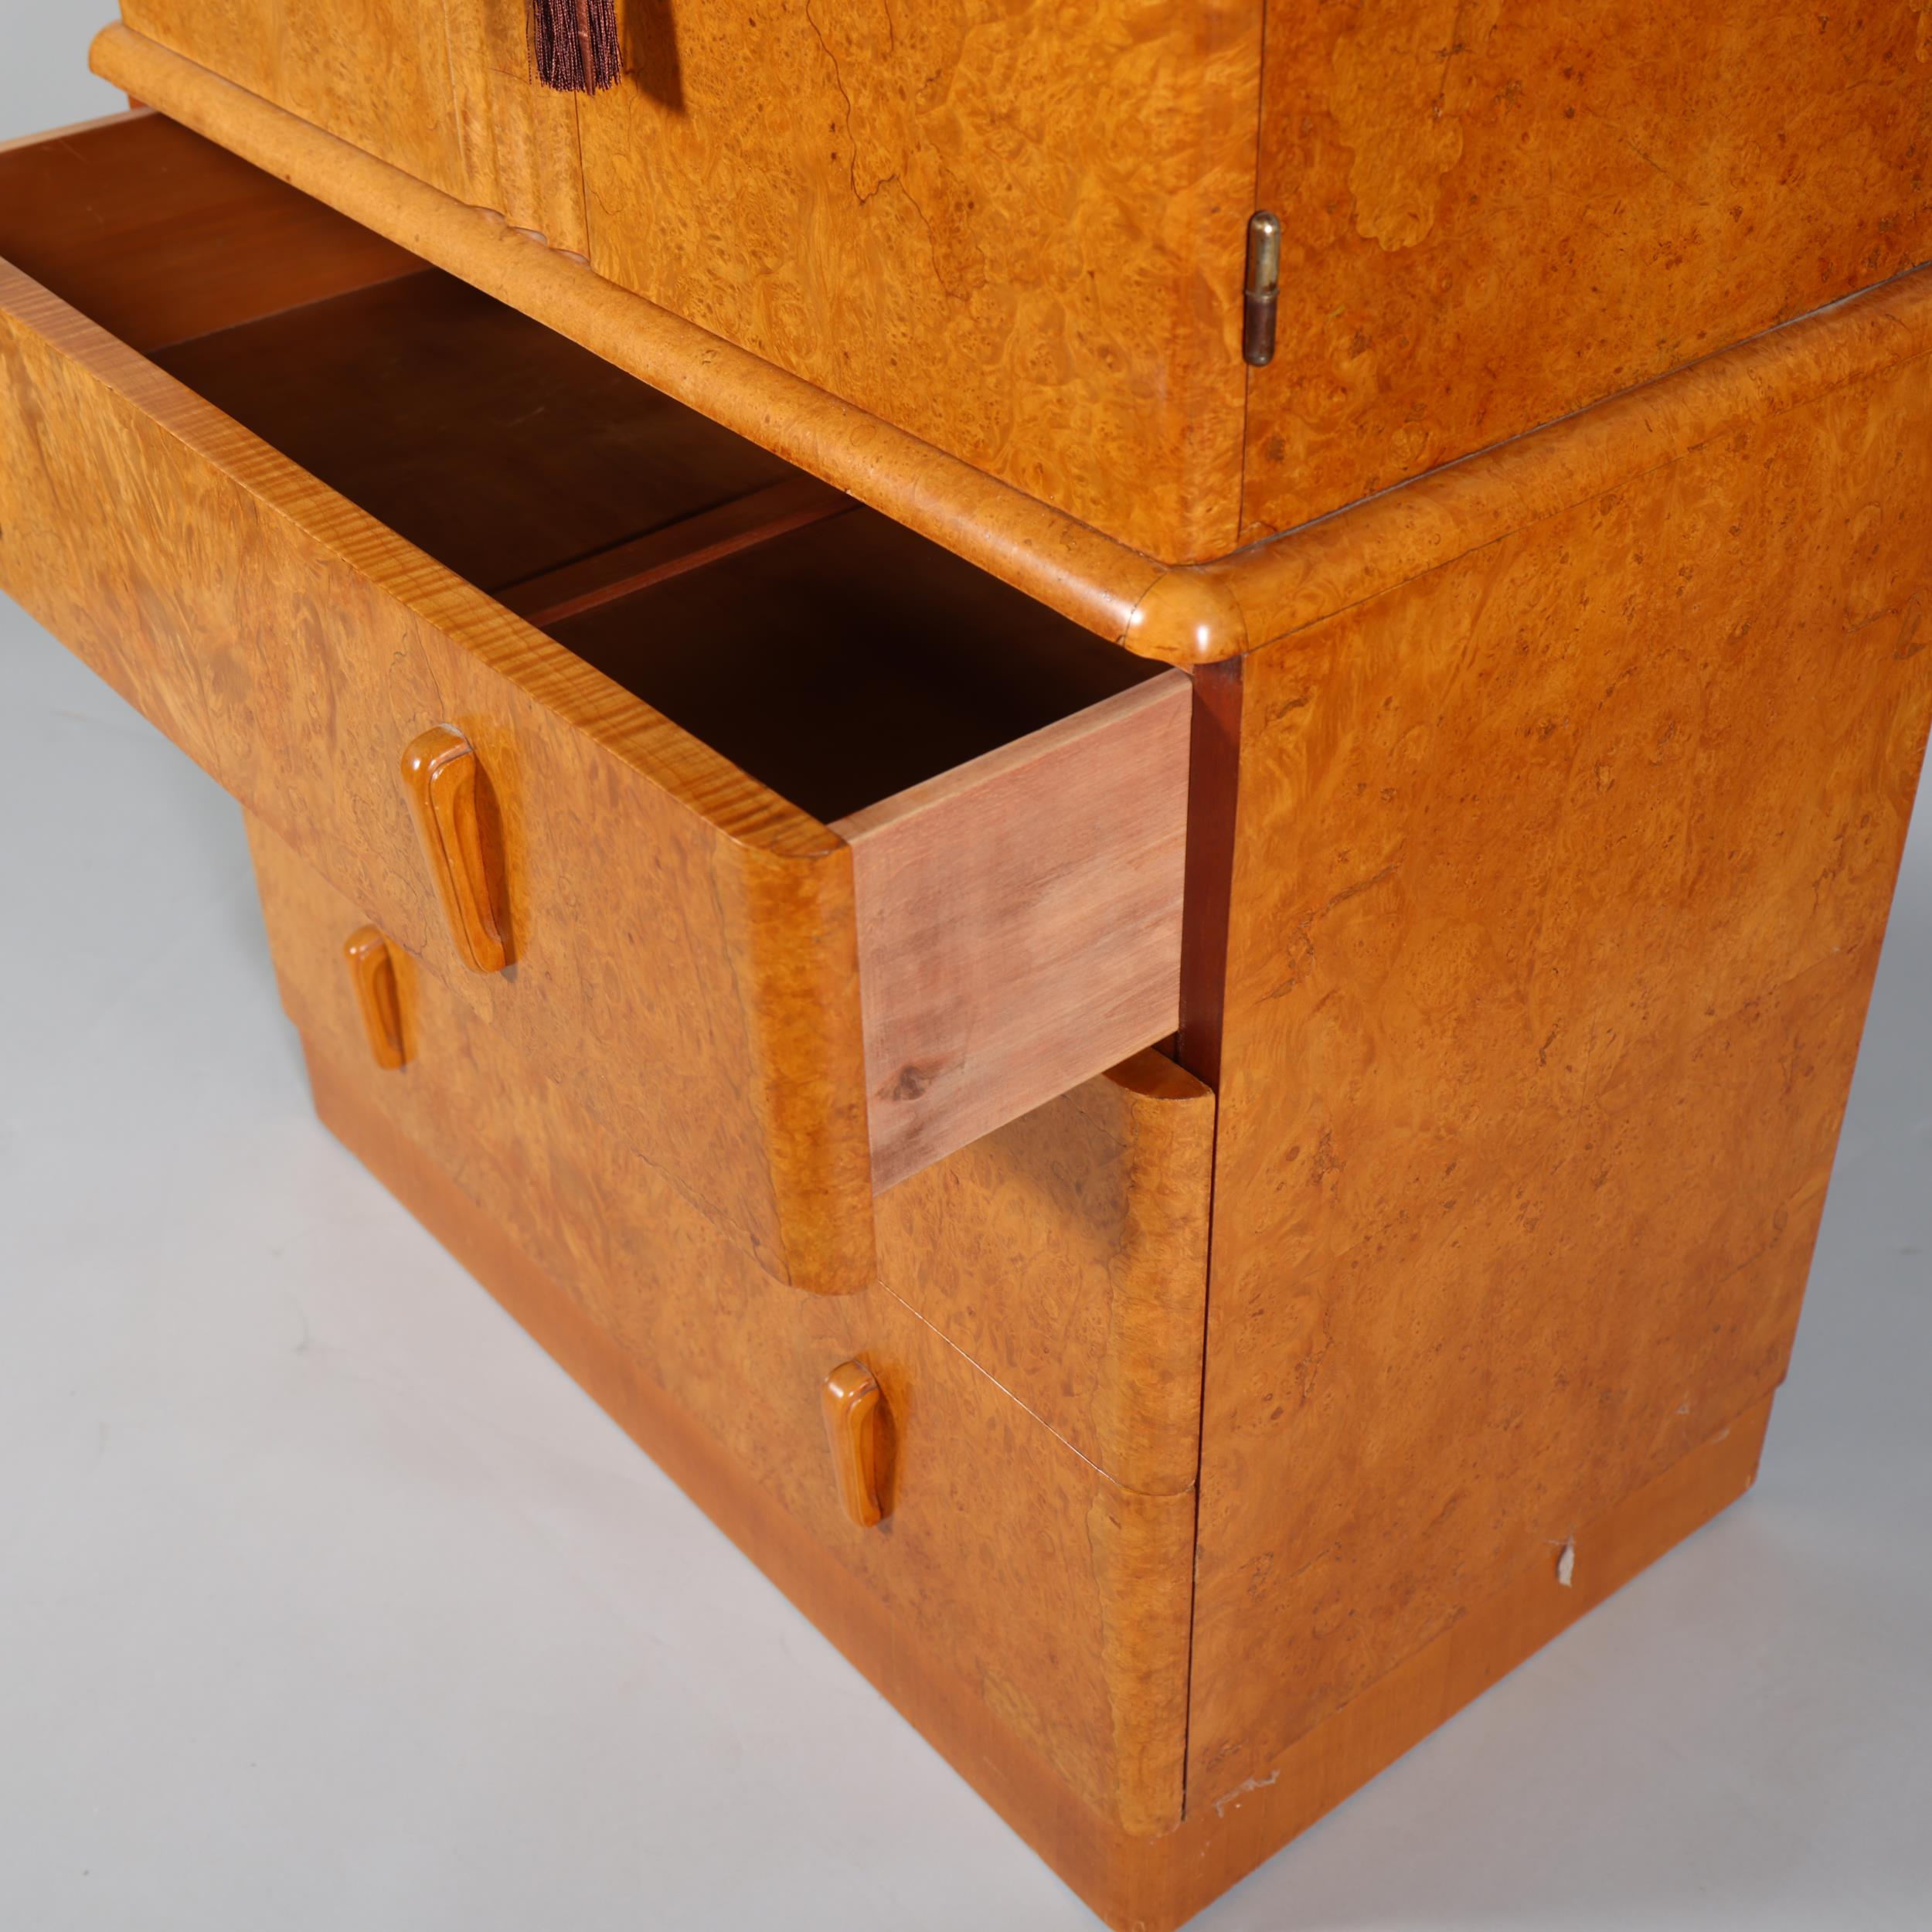 Art Deco birdseye maple tallboy, 2 doors above enclosing shelved interior with 3 long drawers - Image 4 of 5